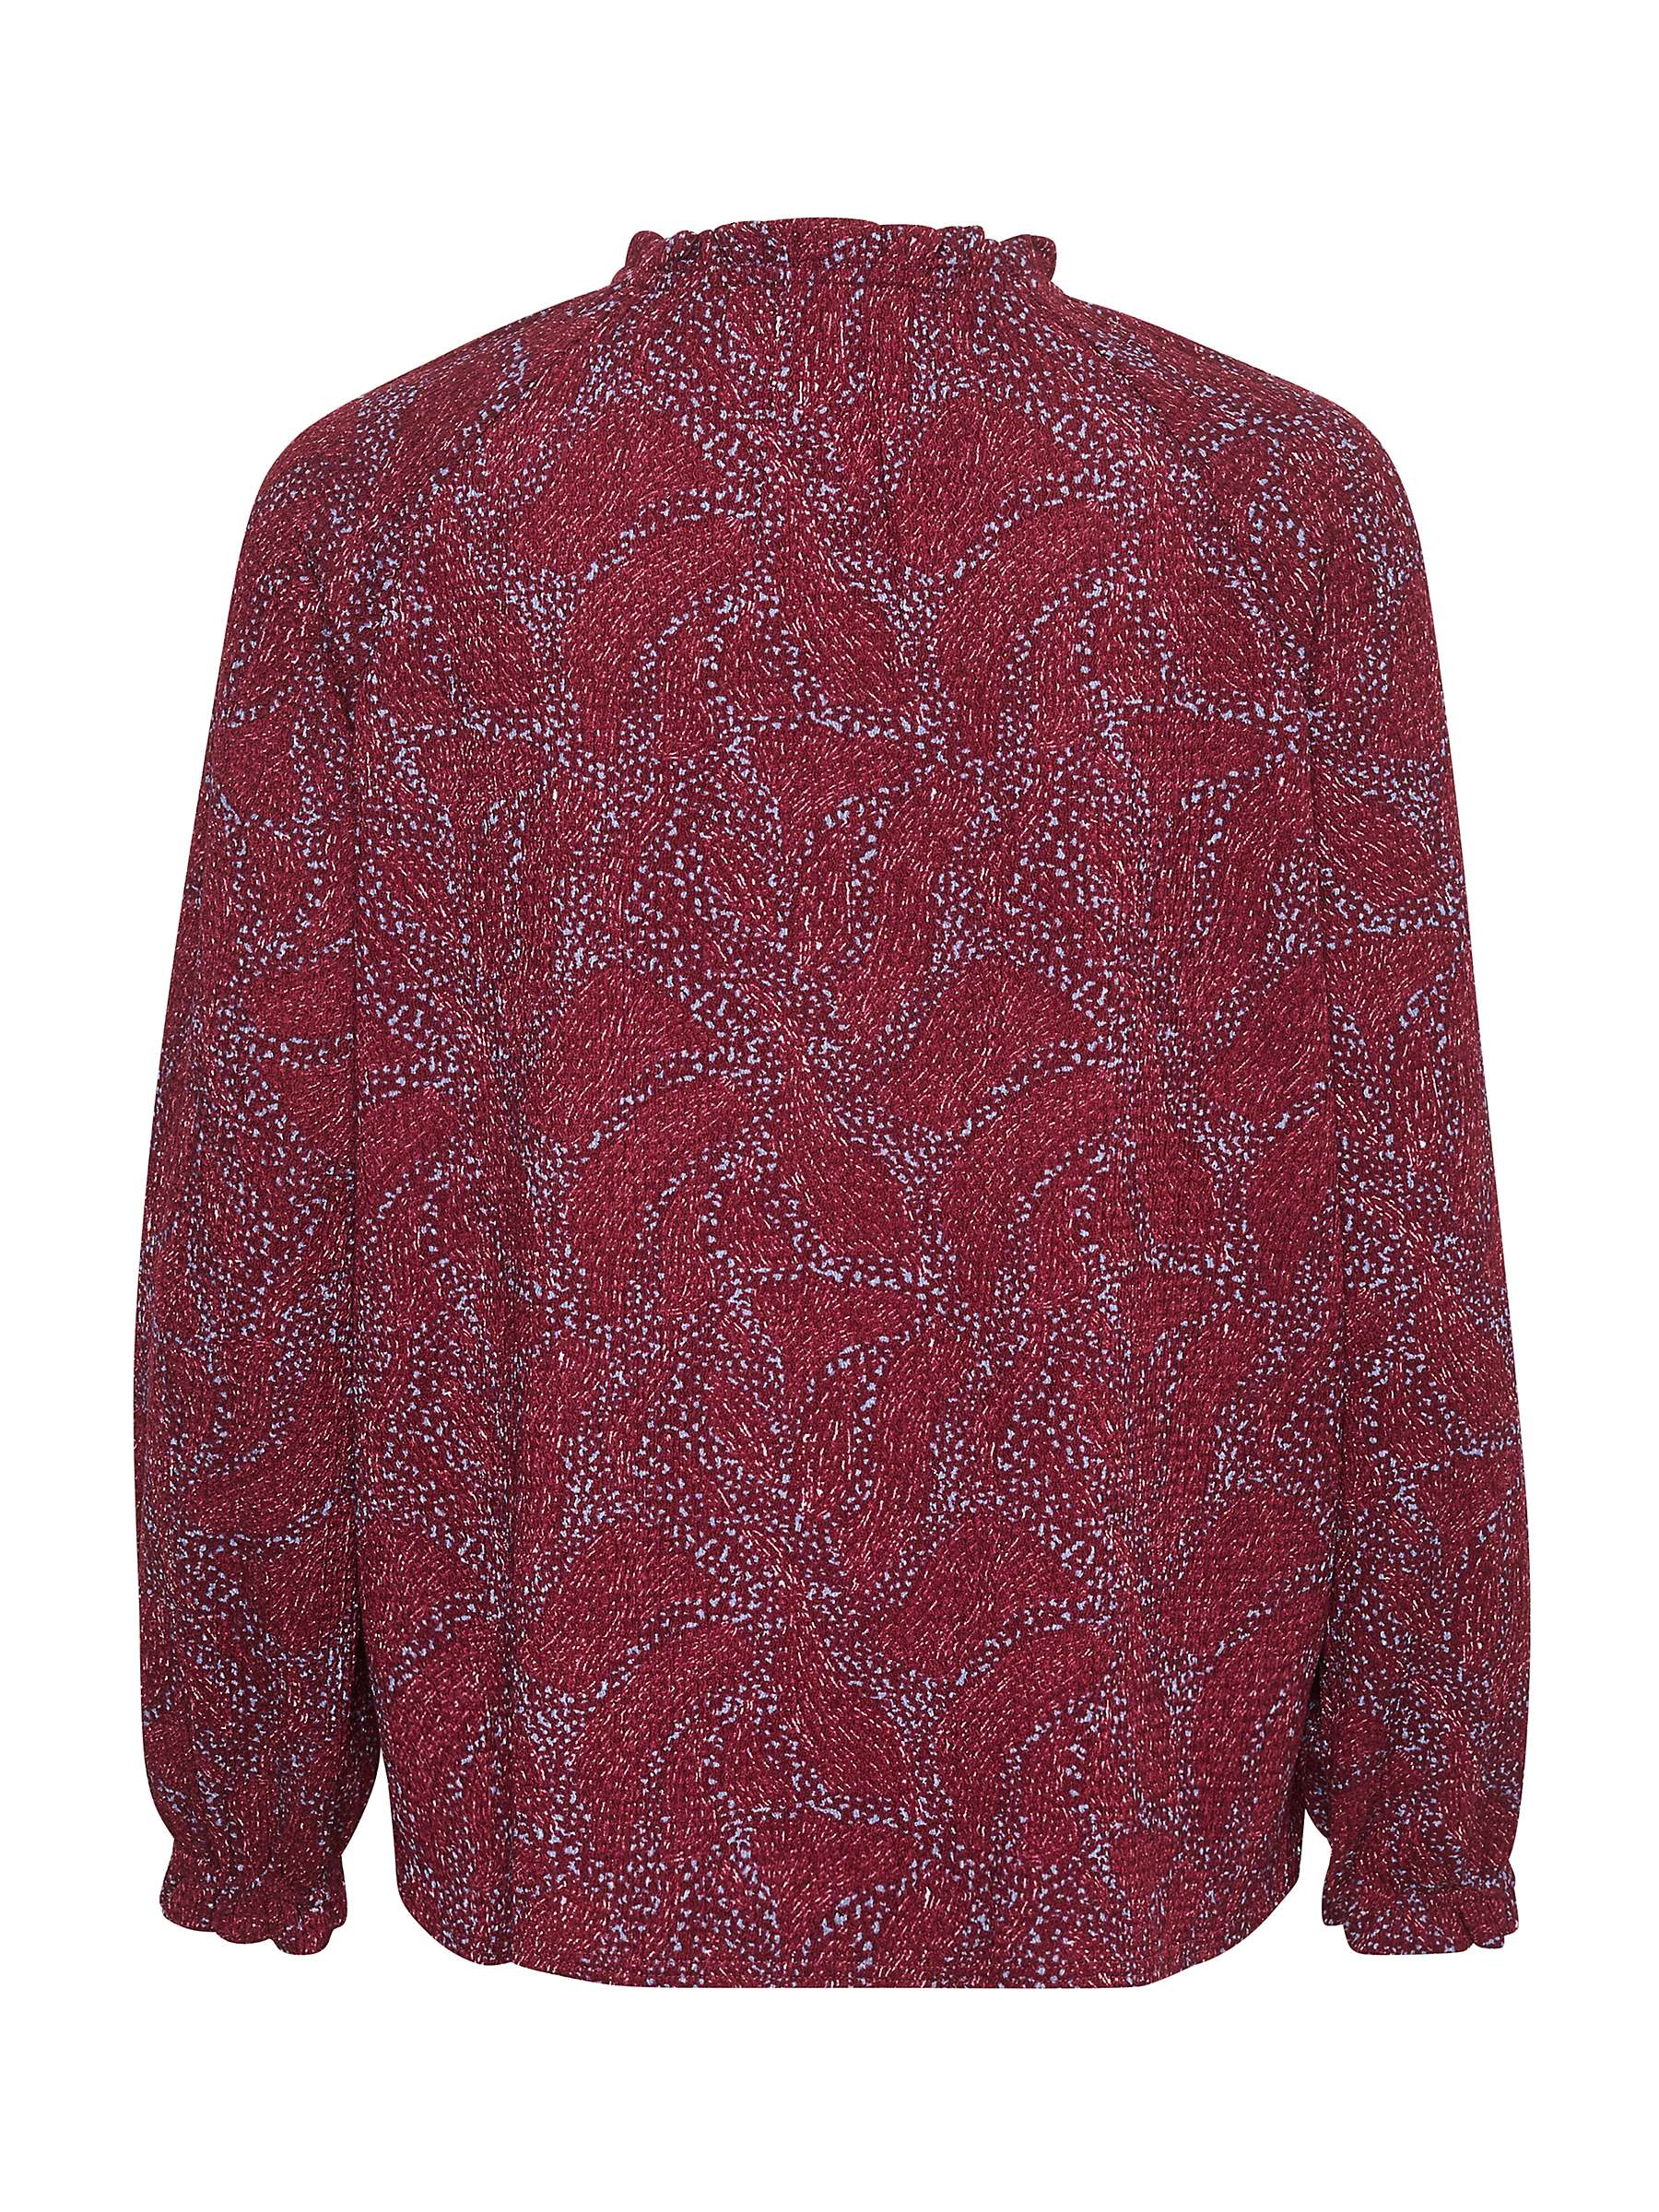 Buy Saint Tropez Averie Stormy Wind Print Blouse, Red/Multi Online at johnlewis.com